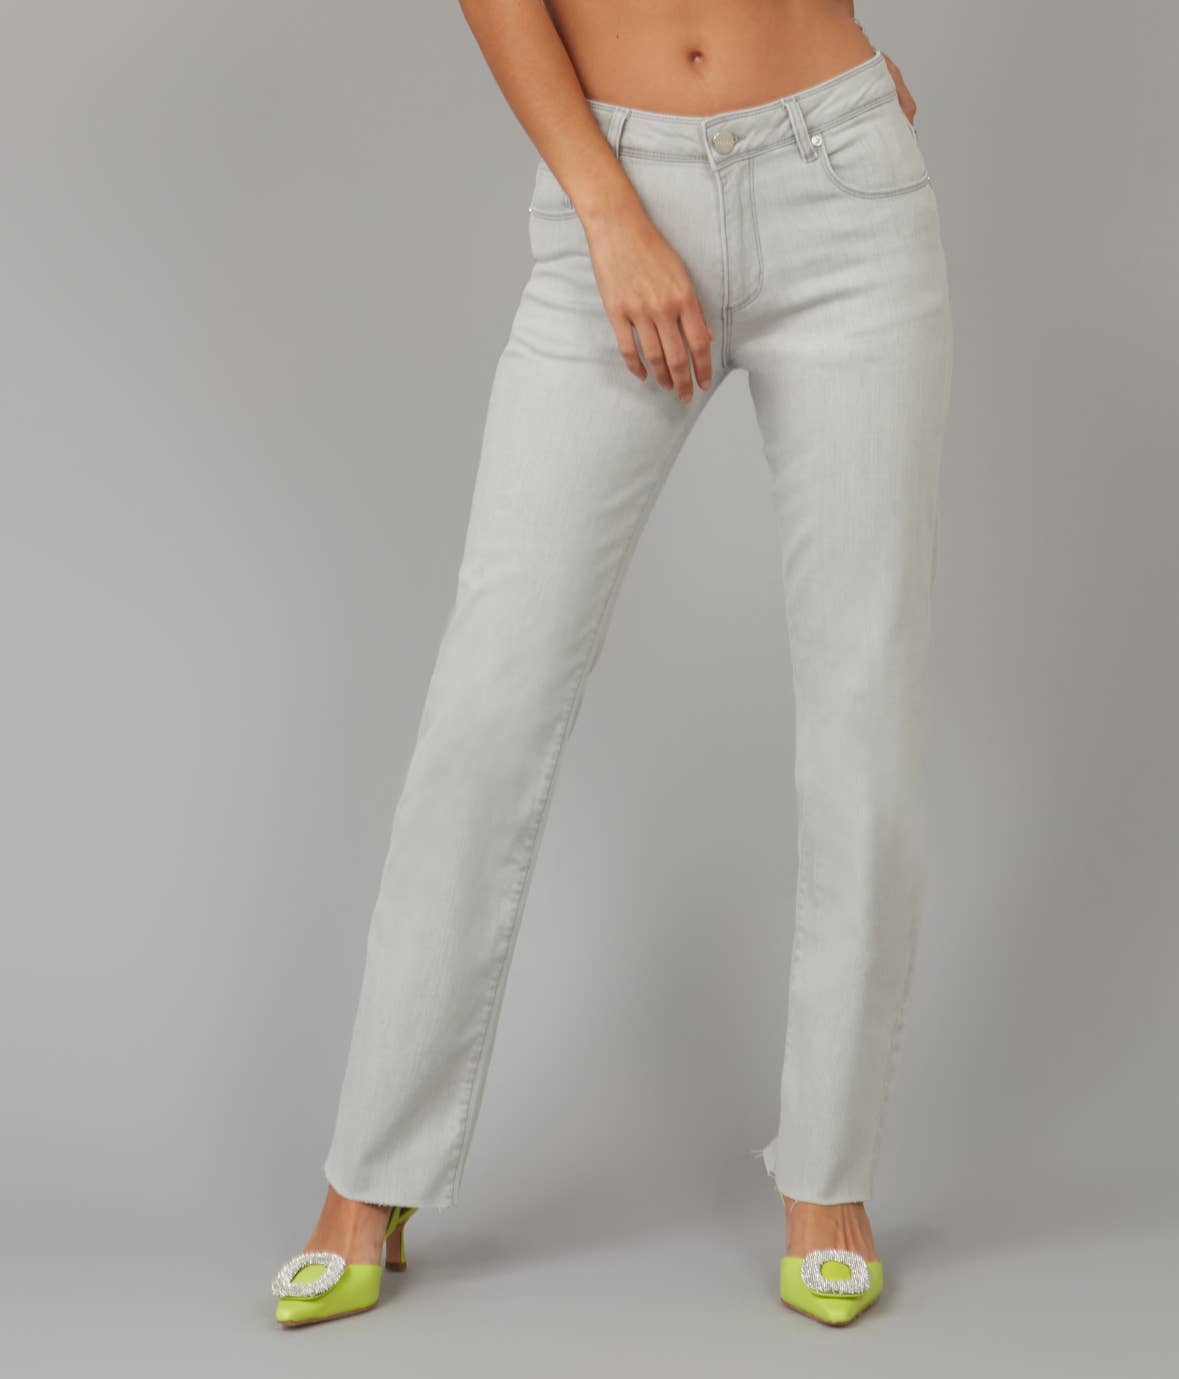 pale taupey gray jeans, midrise with raw hem